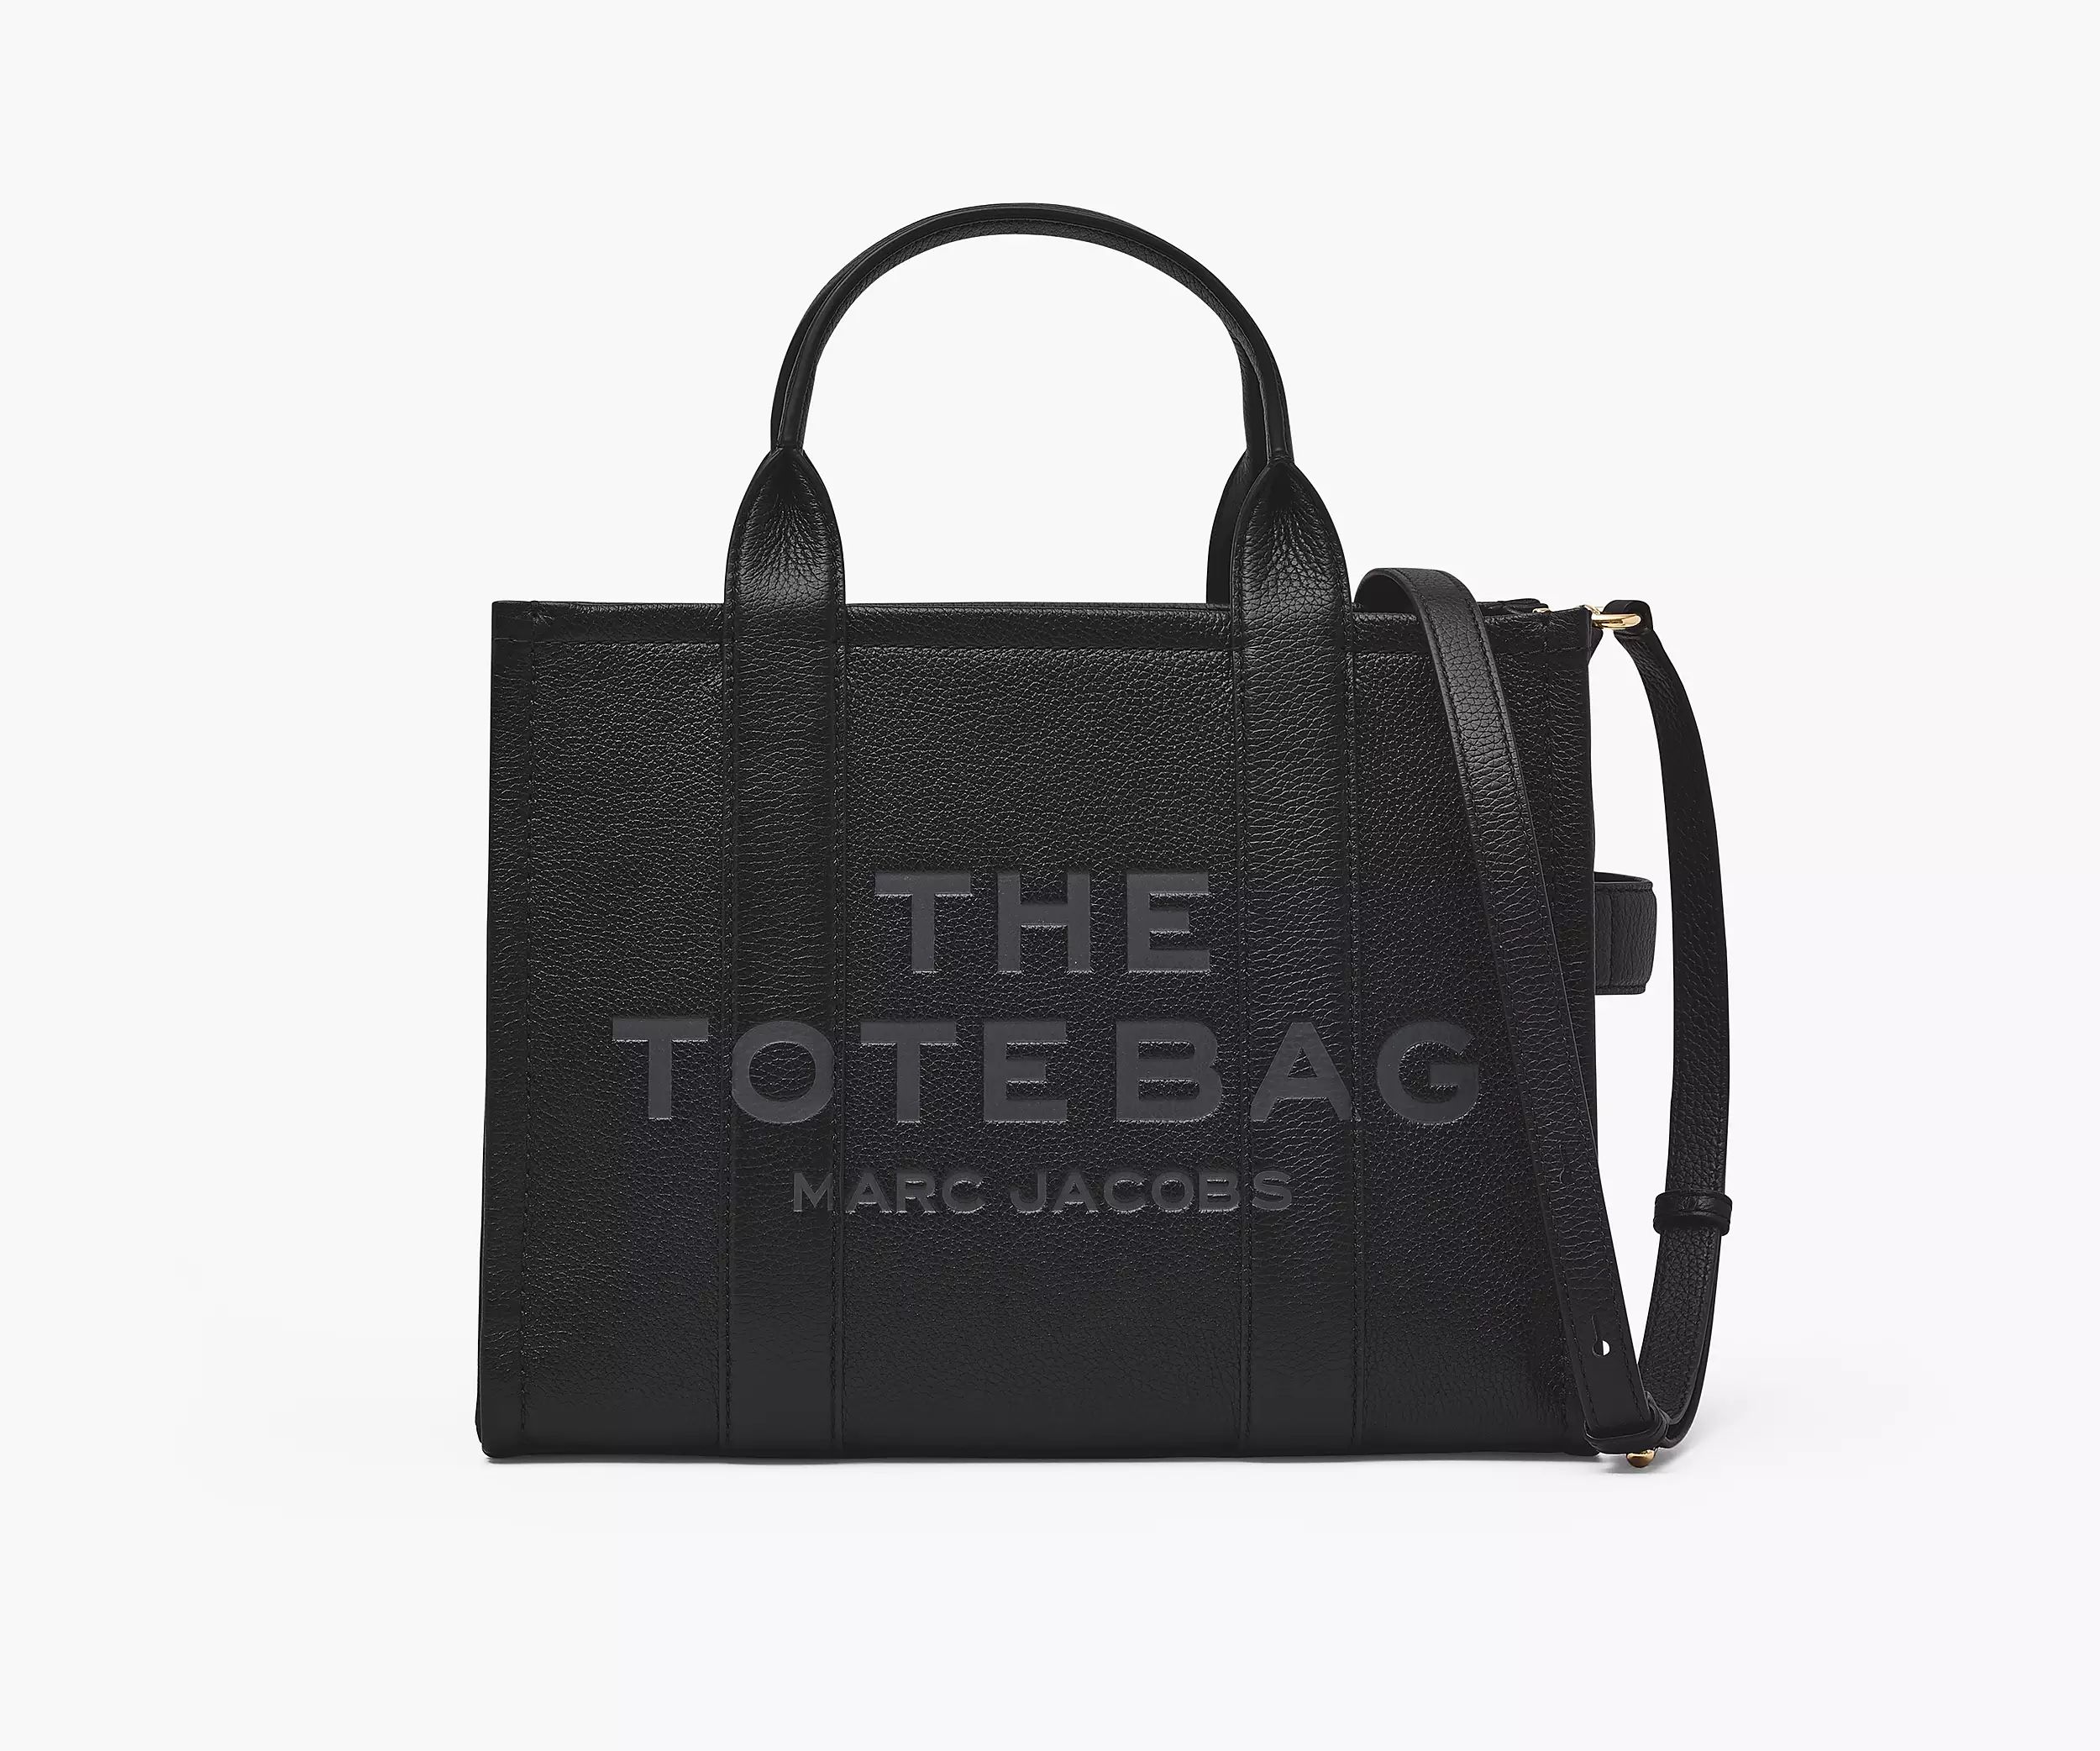 The Leather Medium Tote Bag | Marc Jacobs